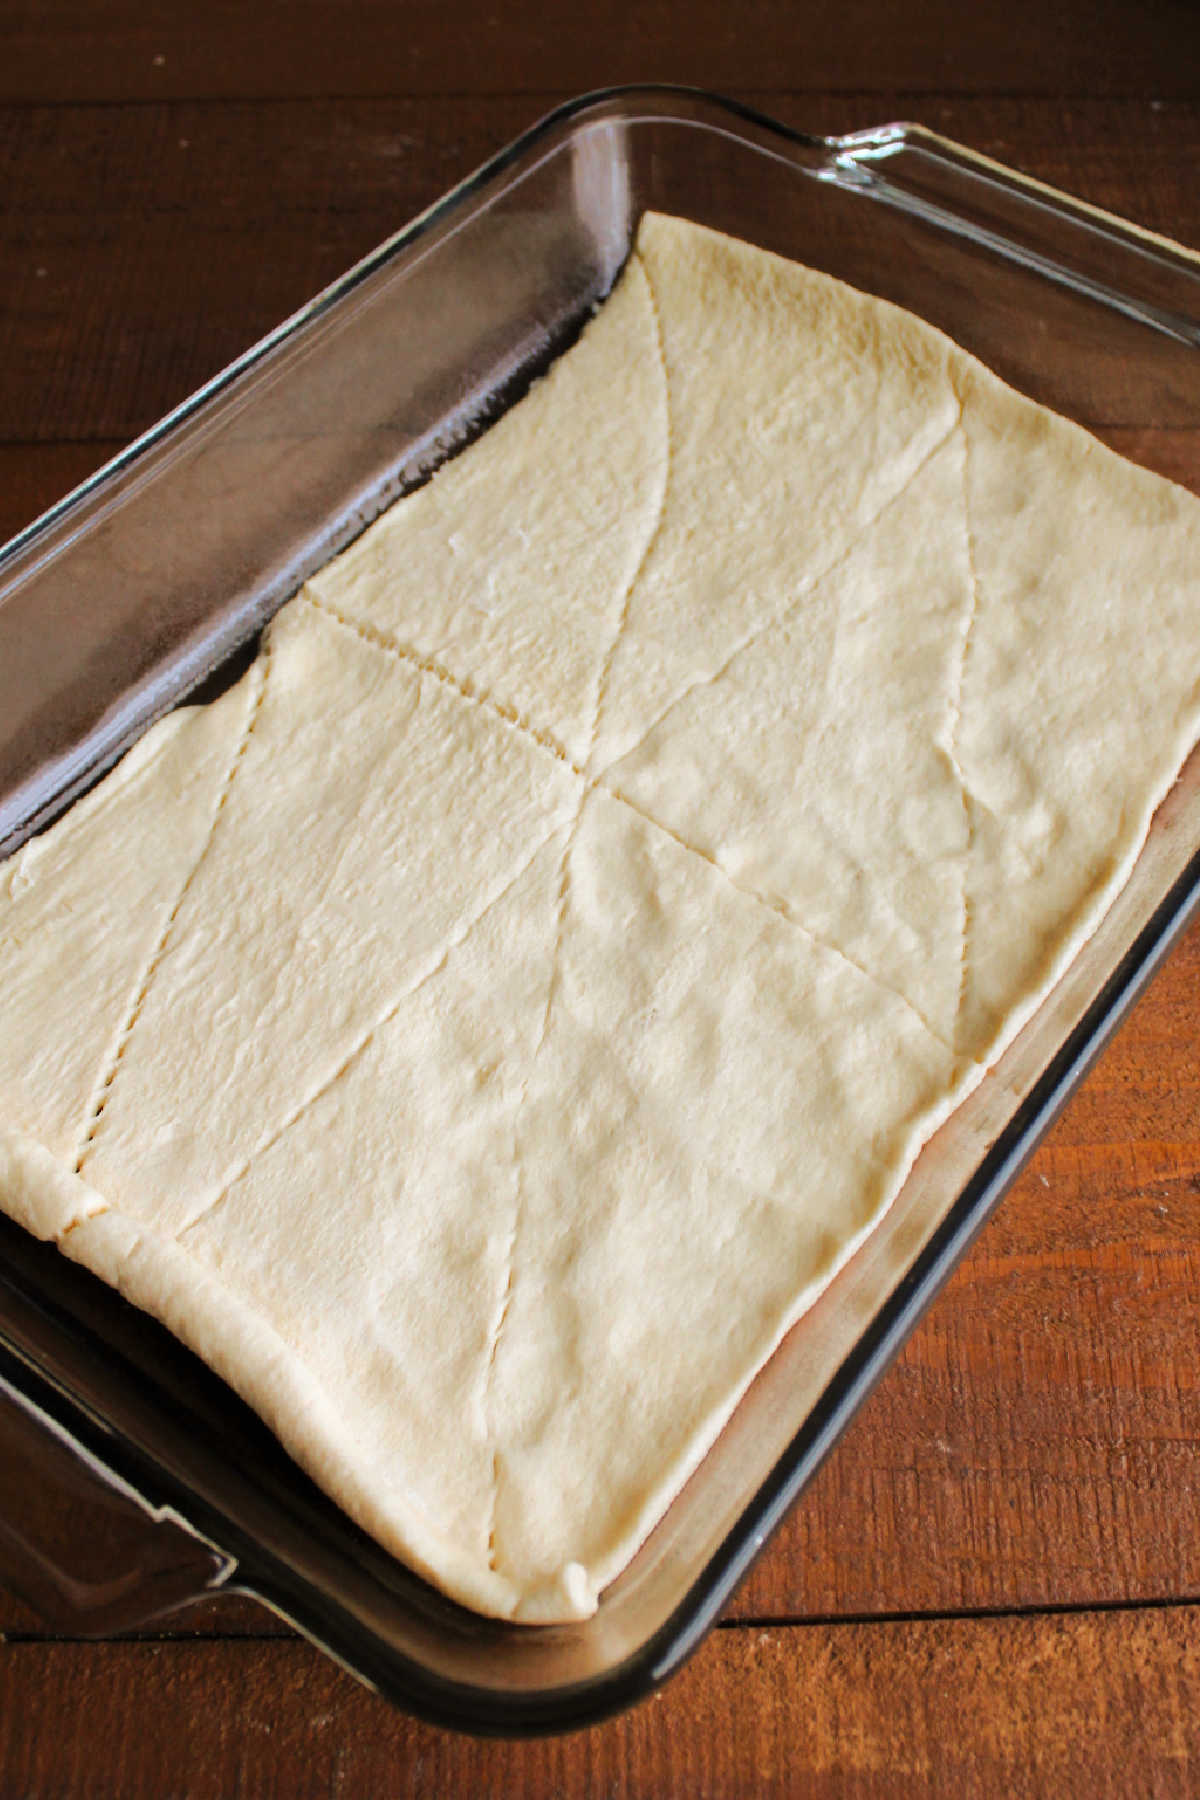 Sealing the seems on crescent dough and pressing it into a 9x13-inch pan.